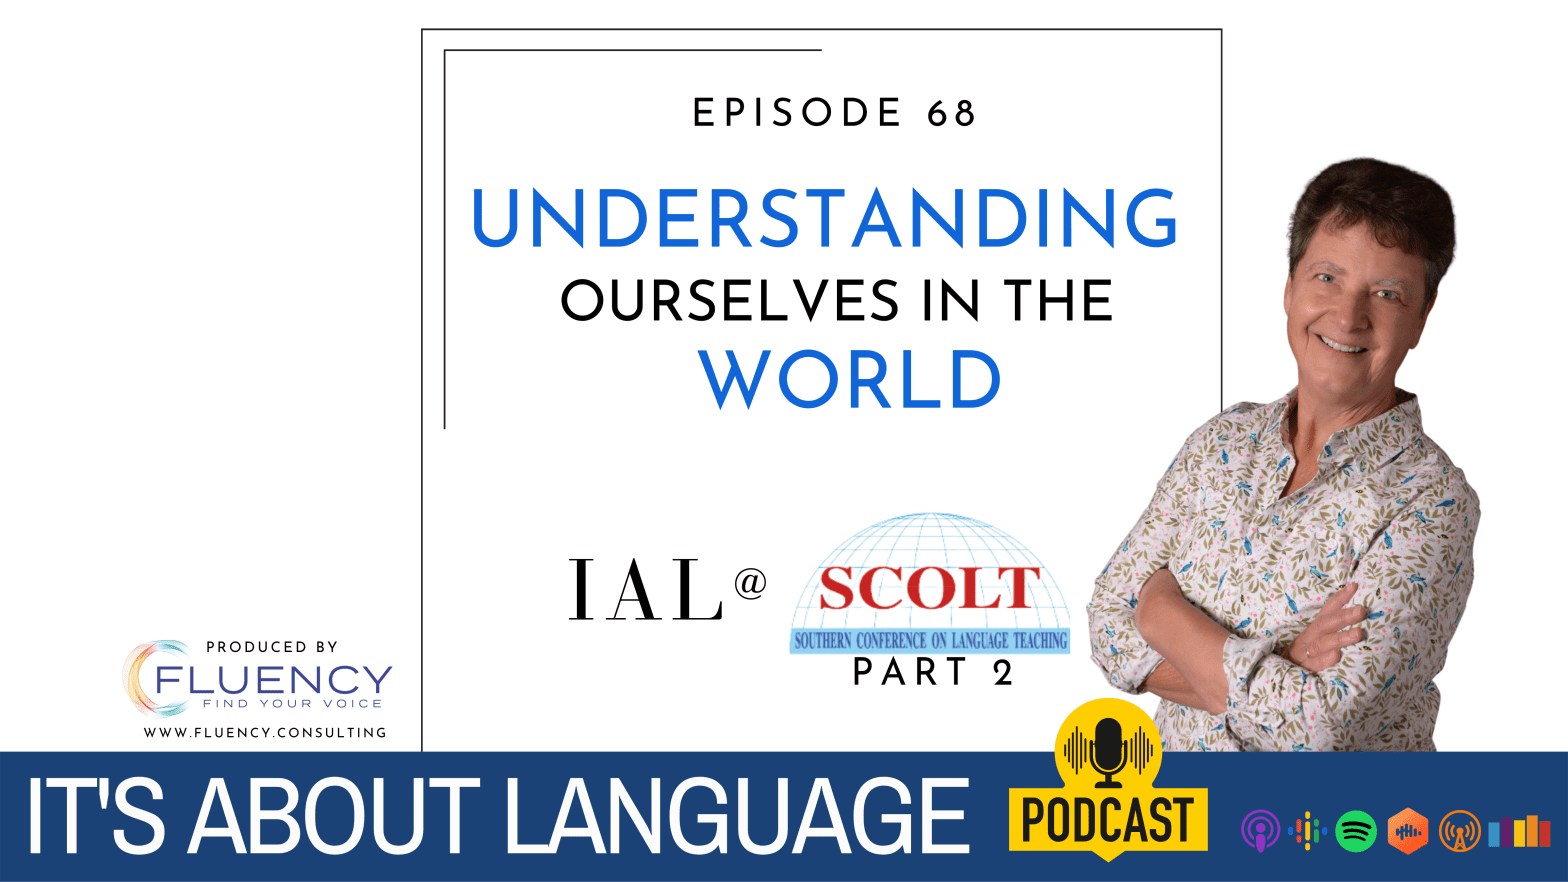 Episode 68 - Understanding Ourselves in the World: IAL at SCOLT Part 2 with Norah Jones